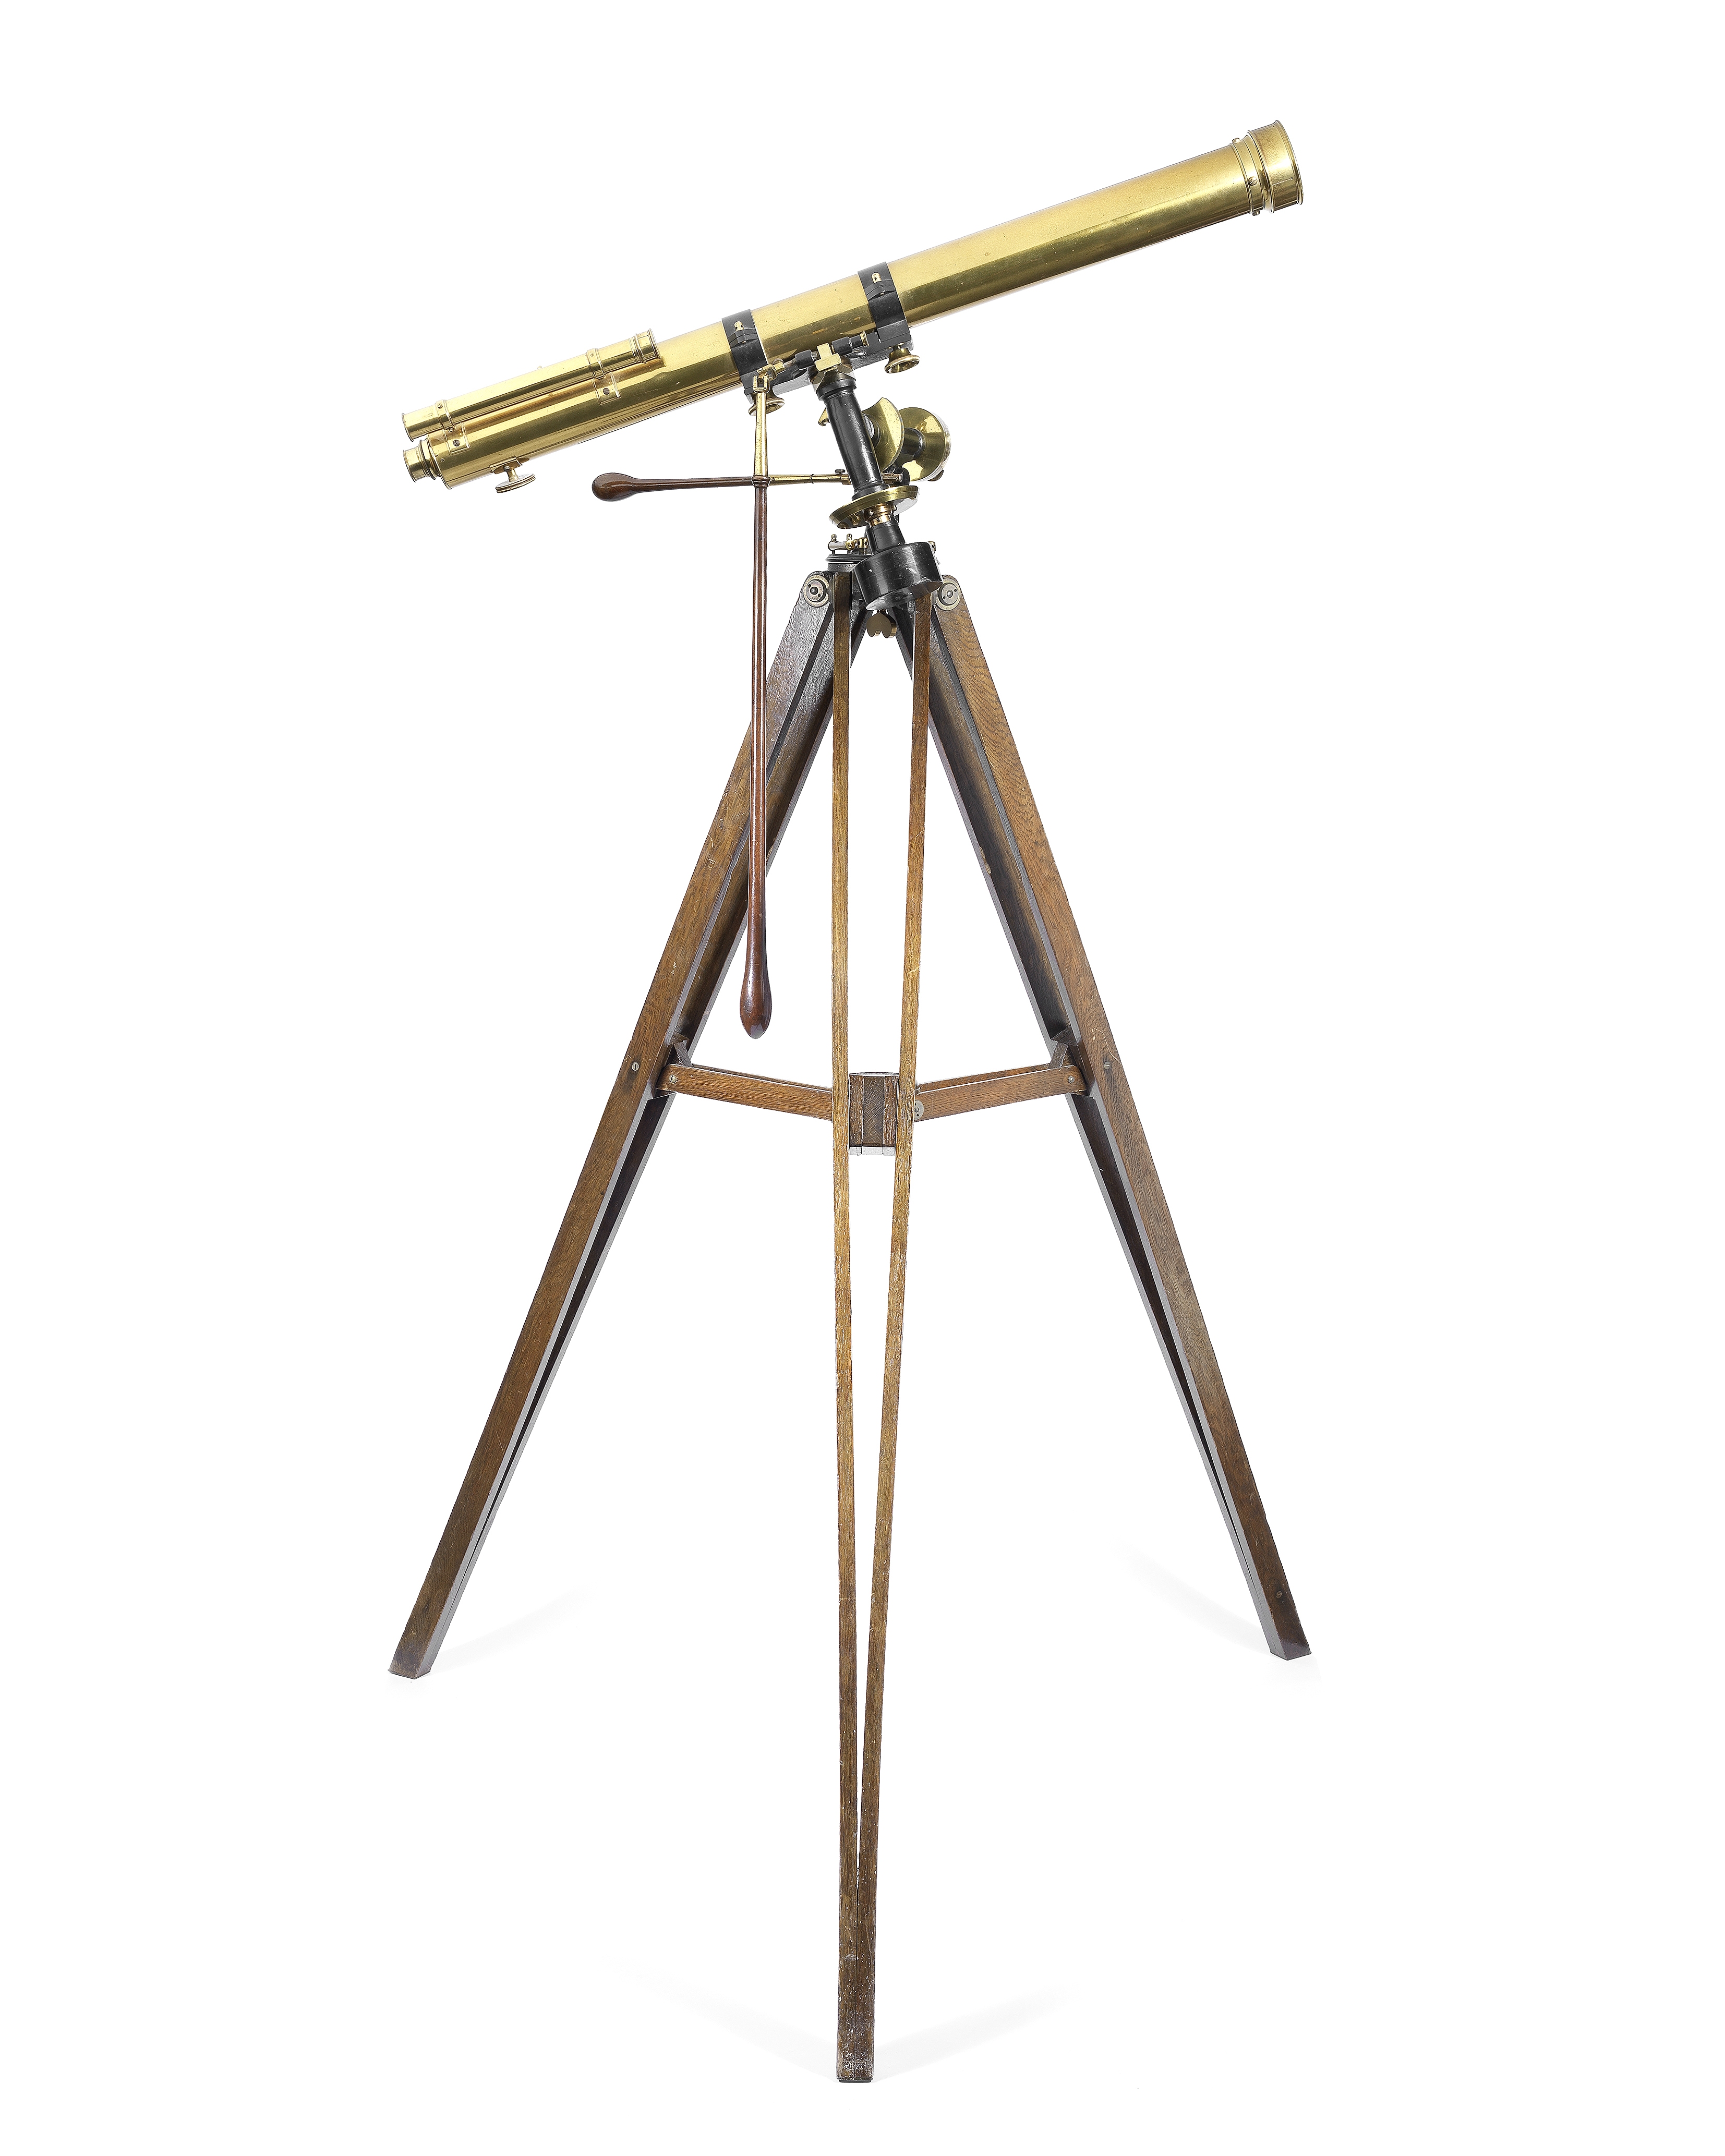 A William Wray 3-inch brass refracting telescope on stand, English, mid 19th century,